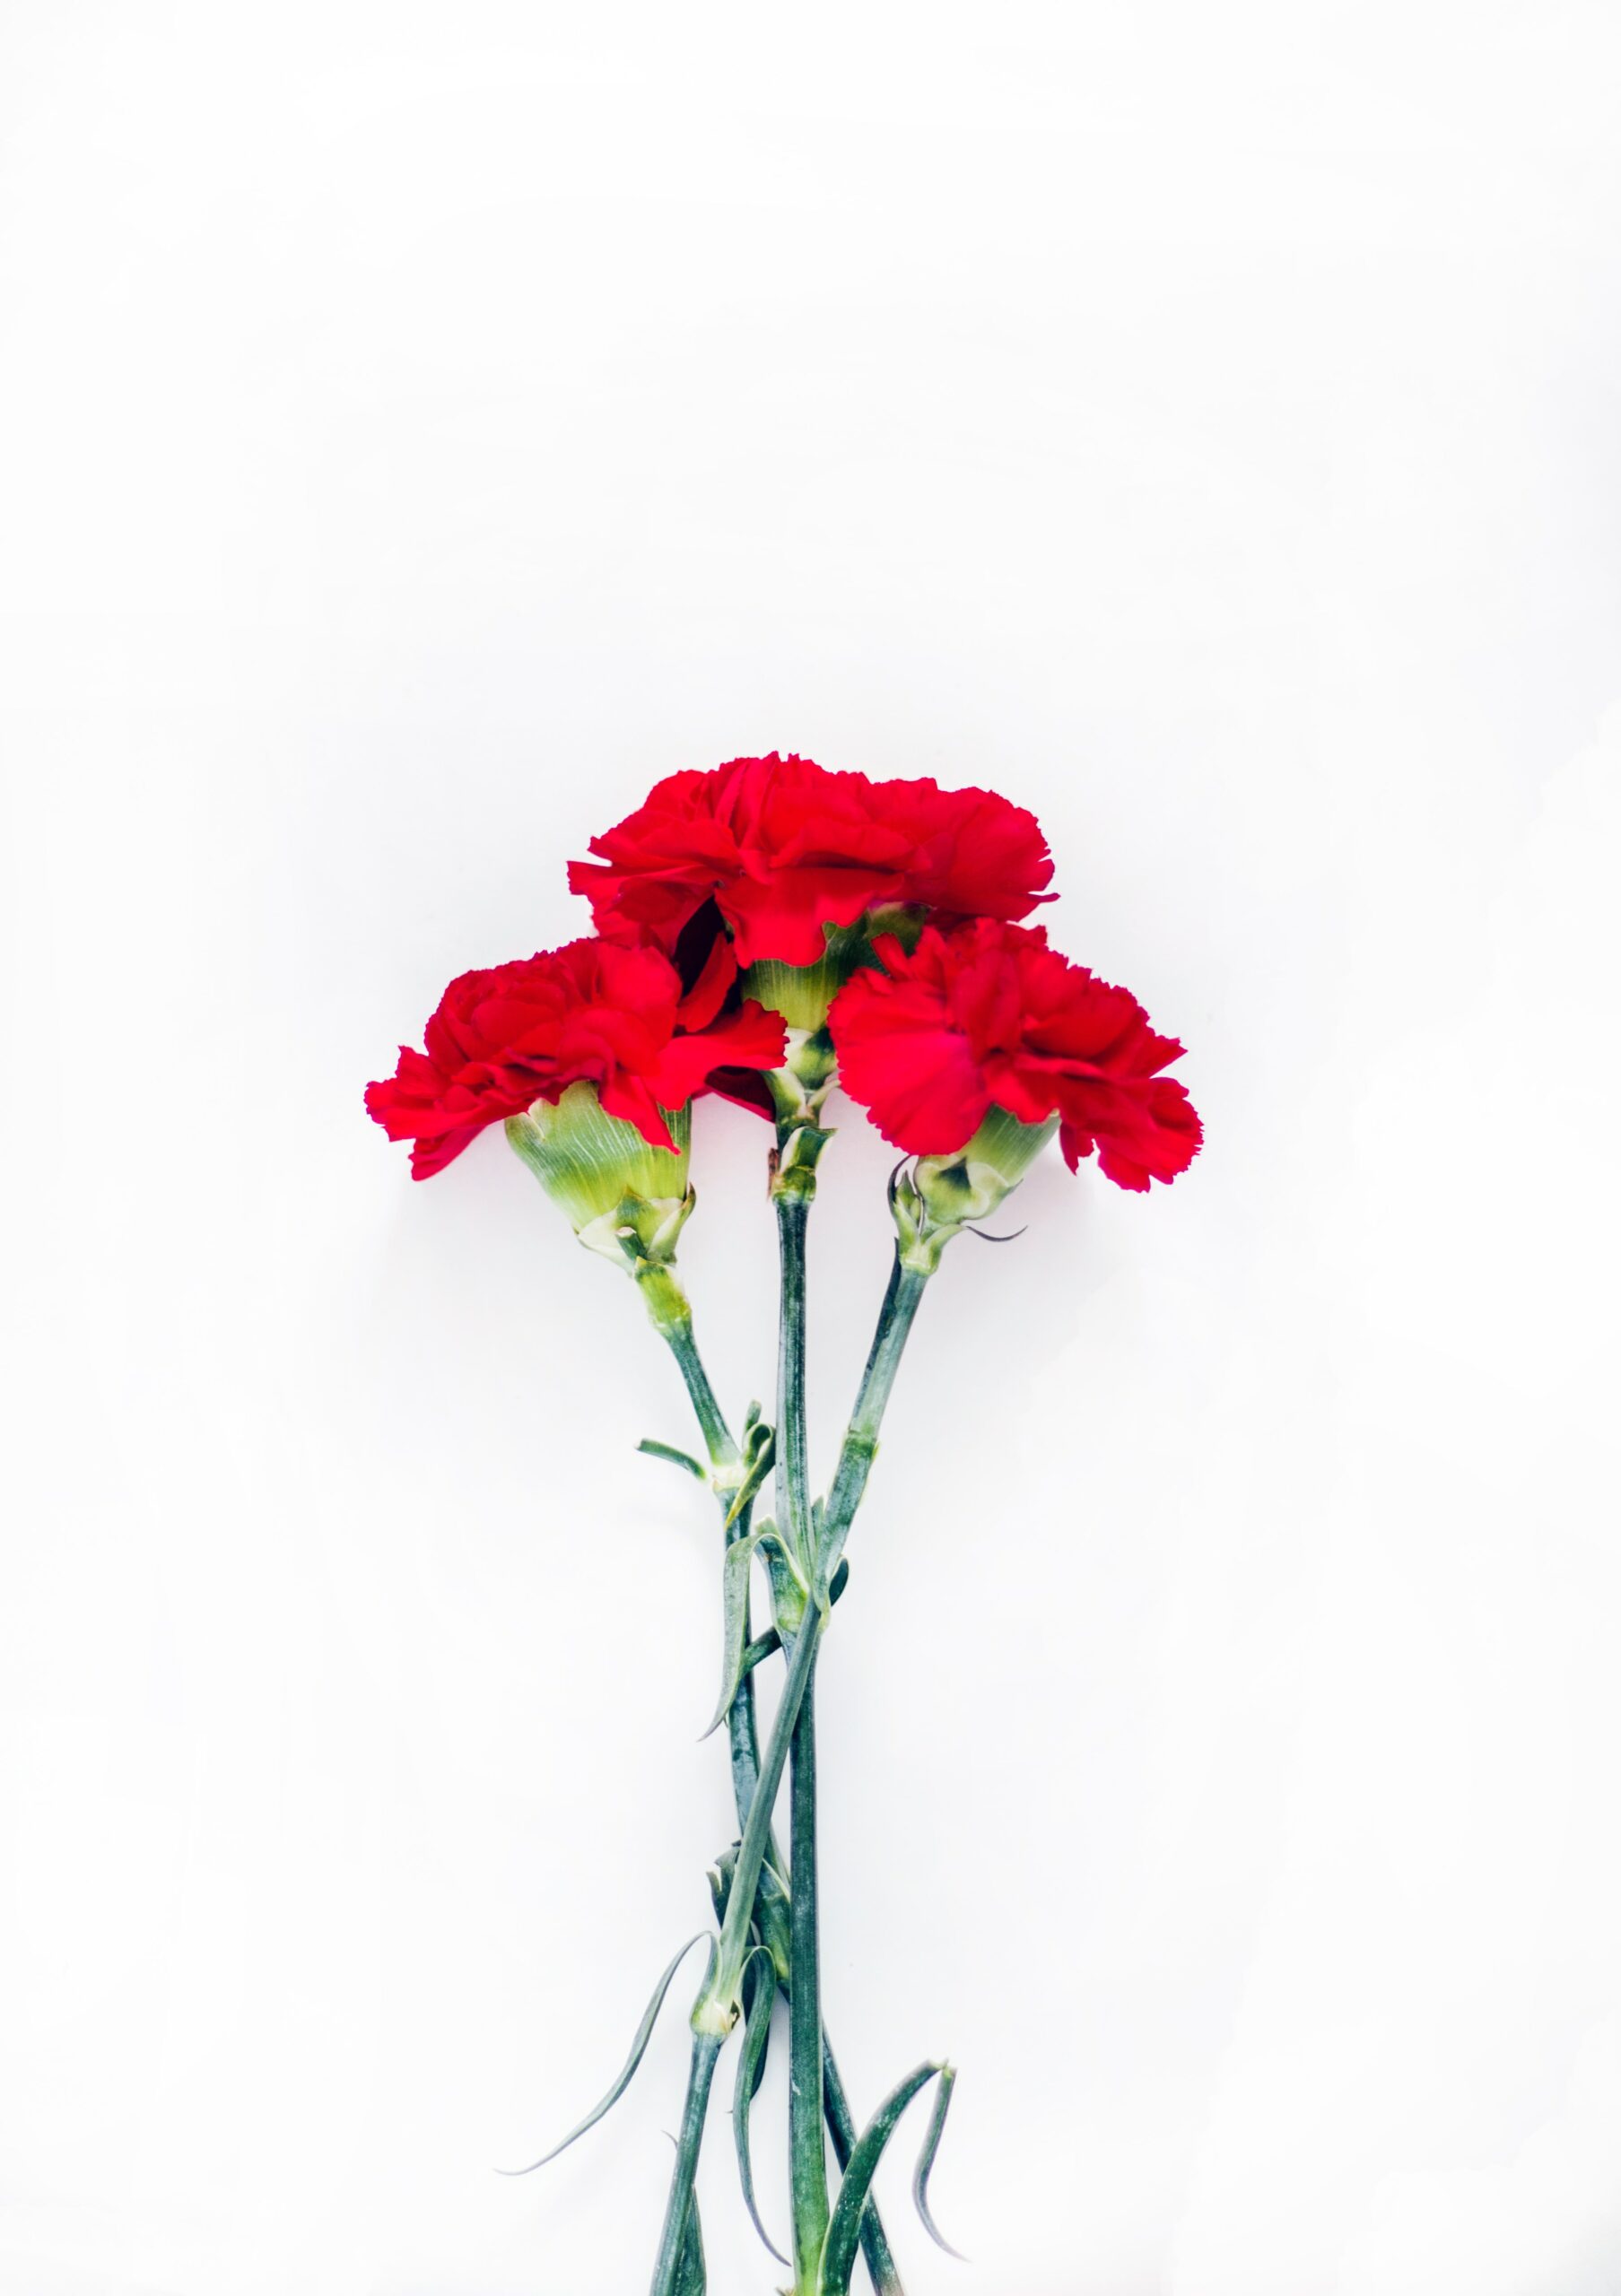 National Carnation Day - Facts About Carnations and History of the Day